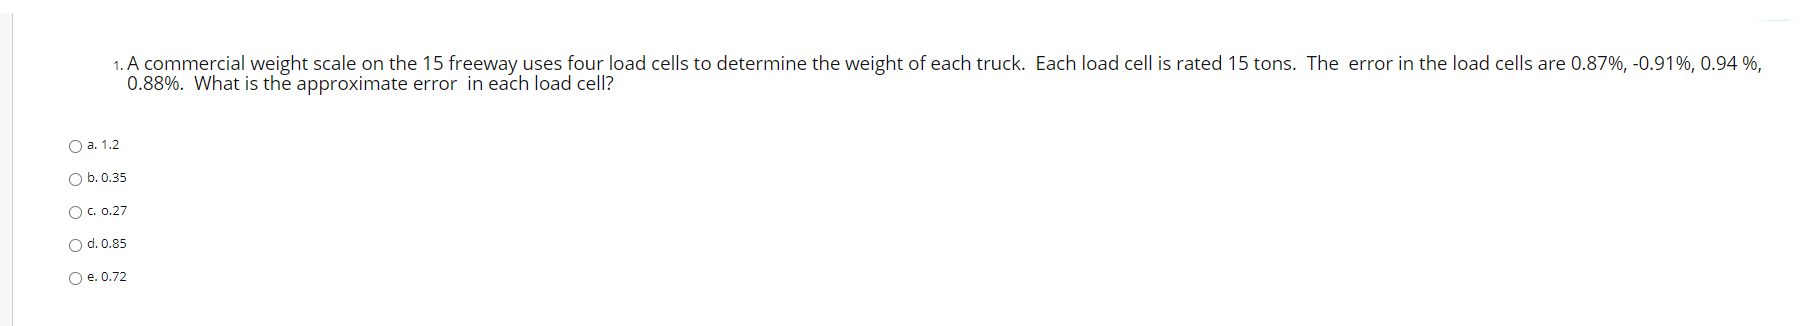 A commercial weight scale on the 15 freeway uses four load cells to determine the weight of each truck. Each load cell is rated 15 tons. The error in the load cells are 0.87%, -0.91%, 0.94 %,
0.88%. What is the approximate error in each load cell?
